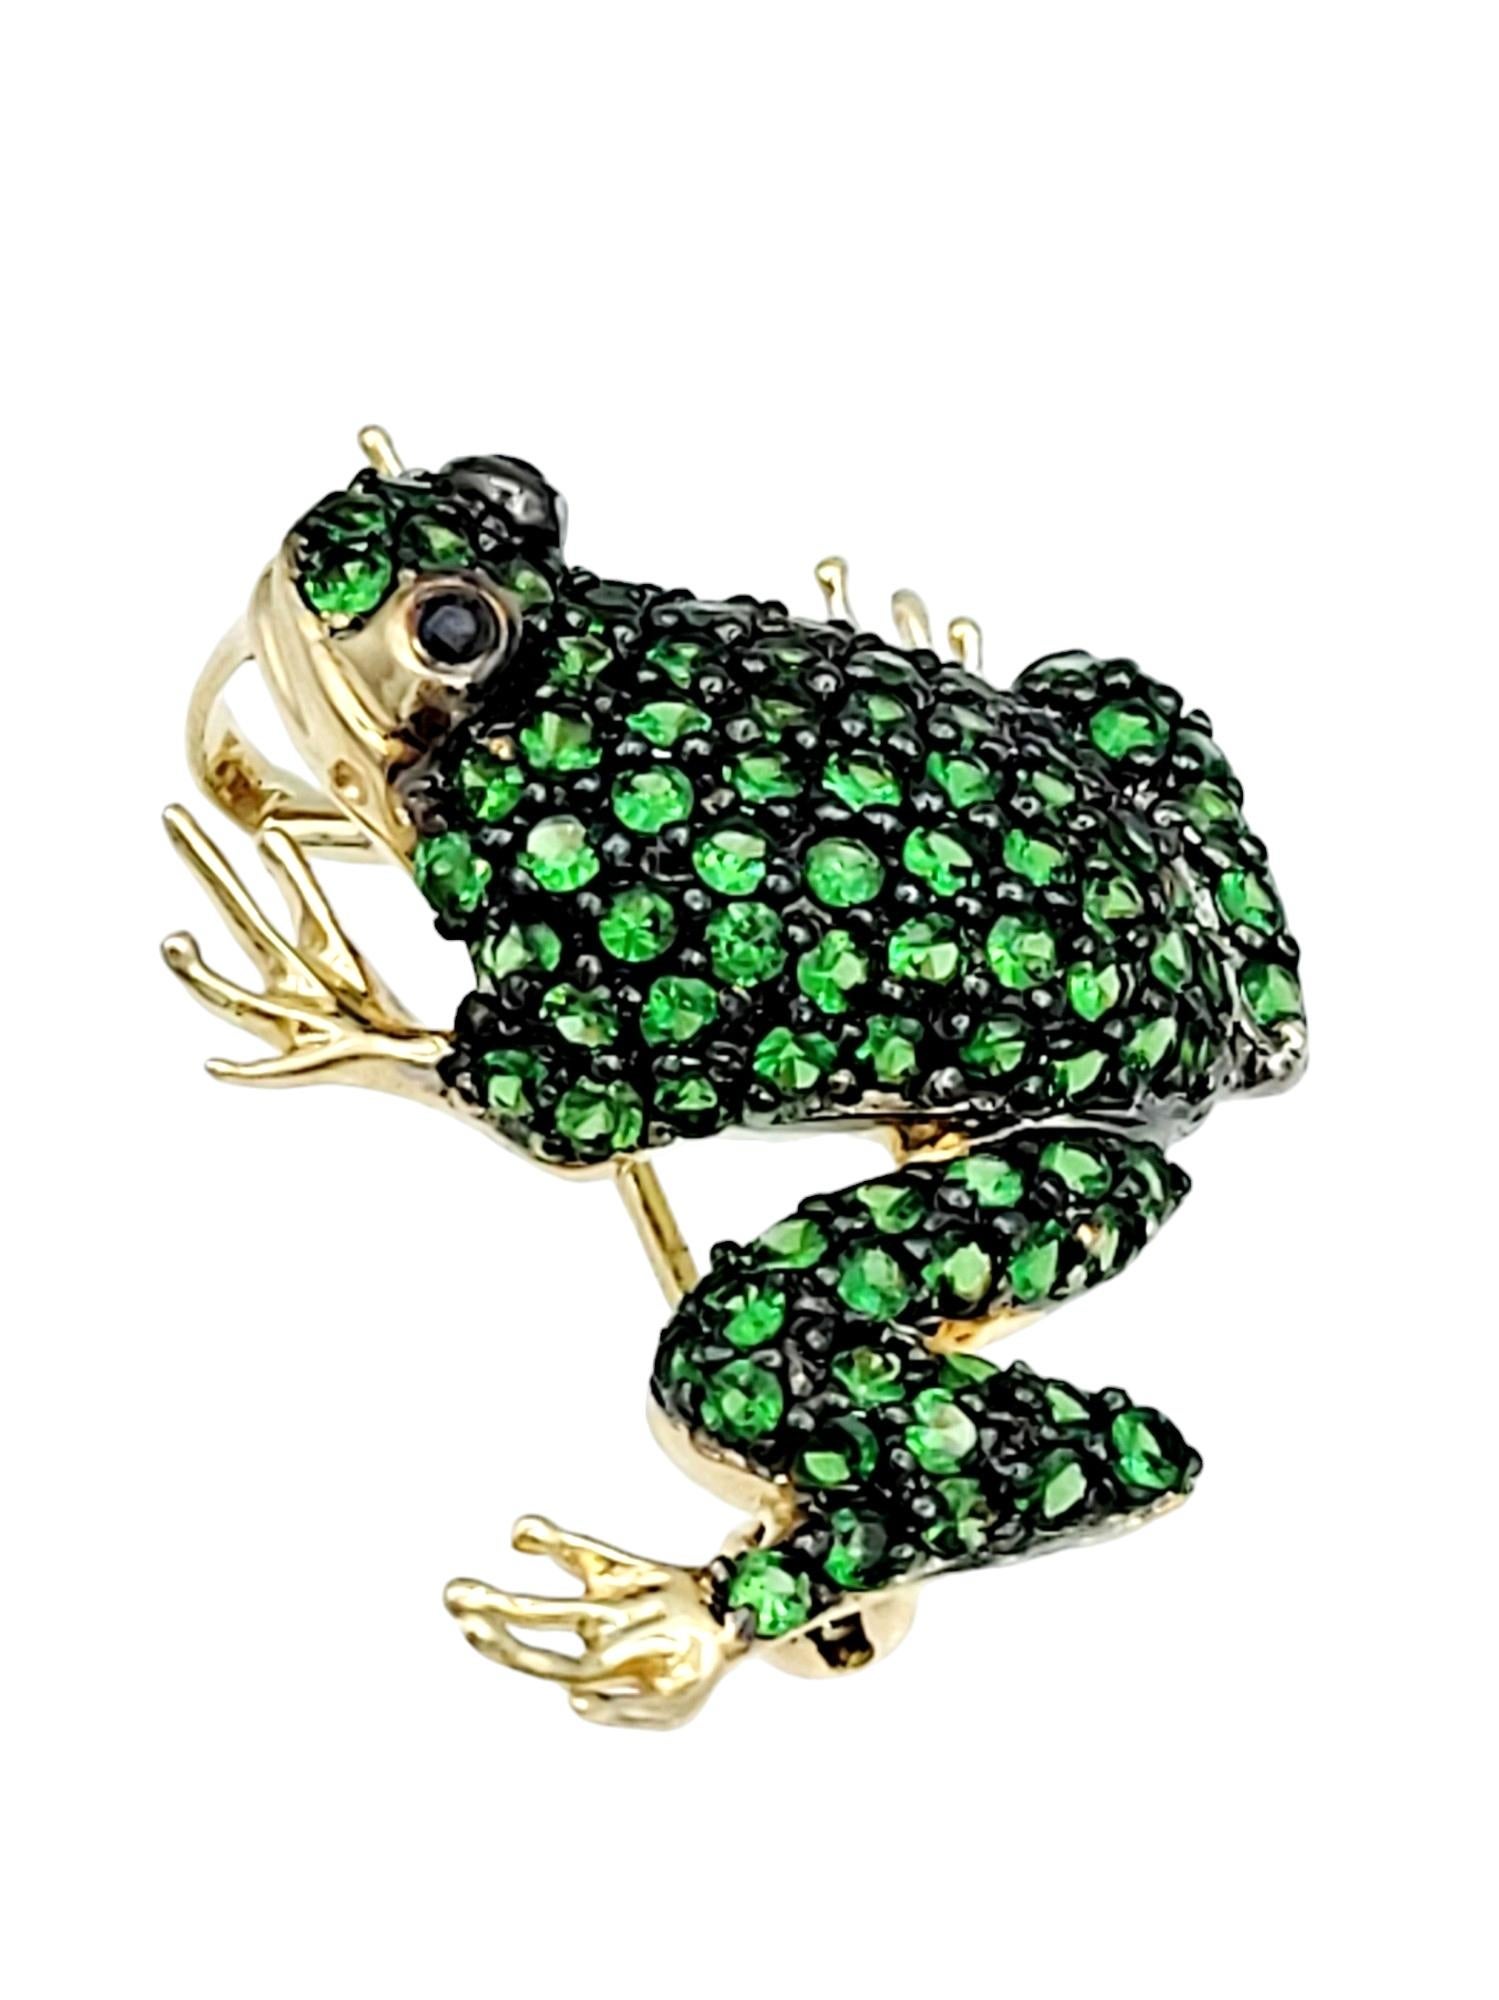 This frog brooch, set in radiant 14 karat yellow gold, is a whimsical and charming piece of jewelry. The body of the frog is adorned with vibrant green tsavorite stones, creating a lively and eye-catching display. The use of tsavorite stones adds a